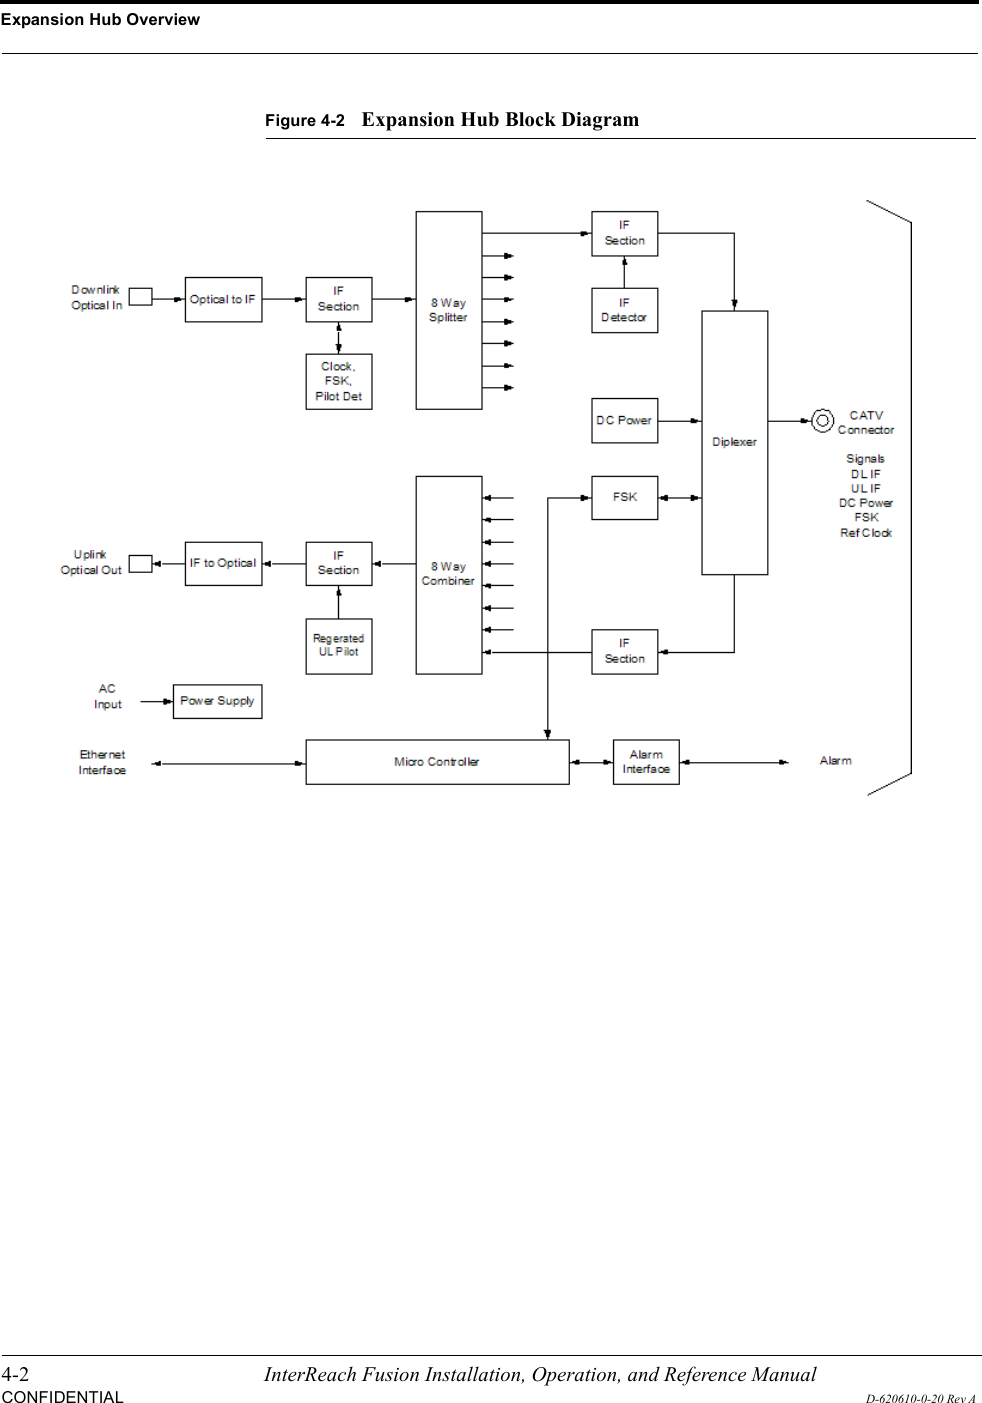 Expansion Hub Overview4-2 InterReach Fusion Installation, Operation, and Reference ManualCONFIDENTIALD-620610-0-20 Rev AFigure 4-2Expansion Hub Block Diagram